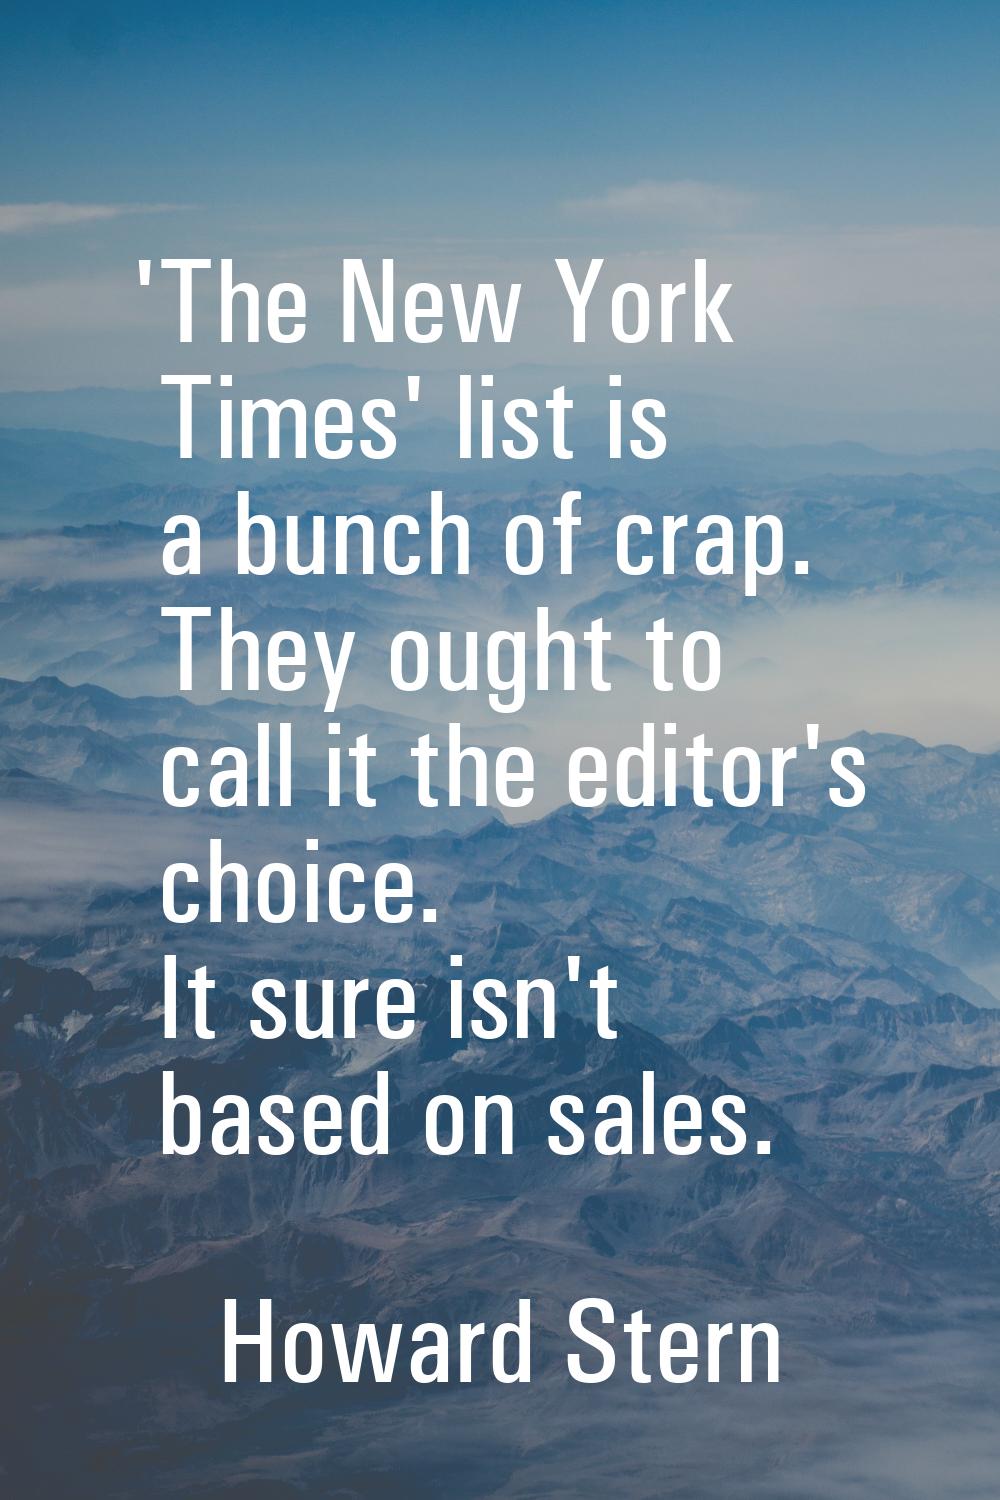 'The New York Times' list is a bunch of crap. They ought to call it the editor's choice. It sure is